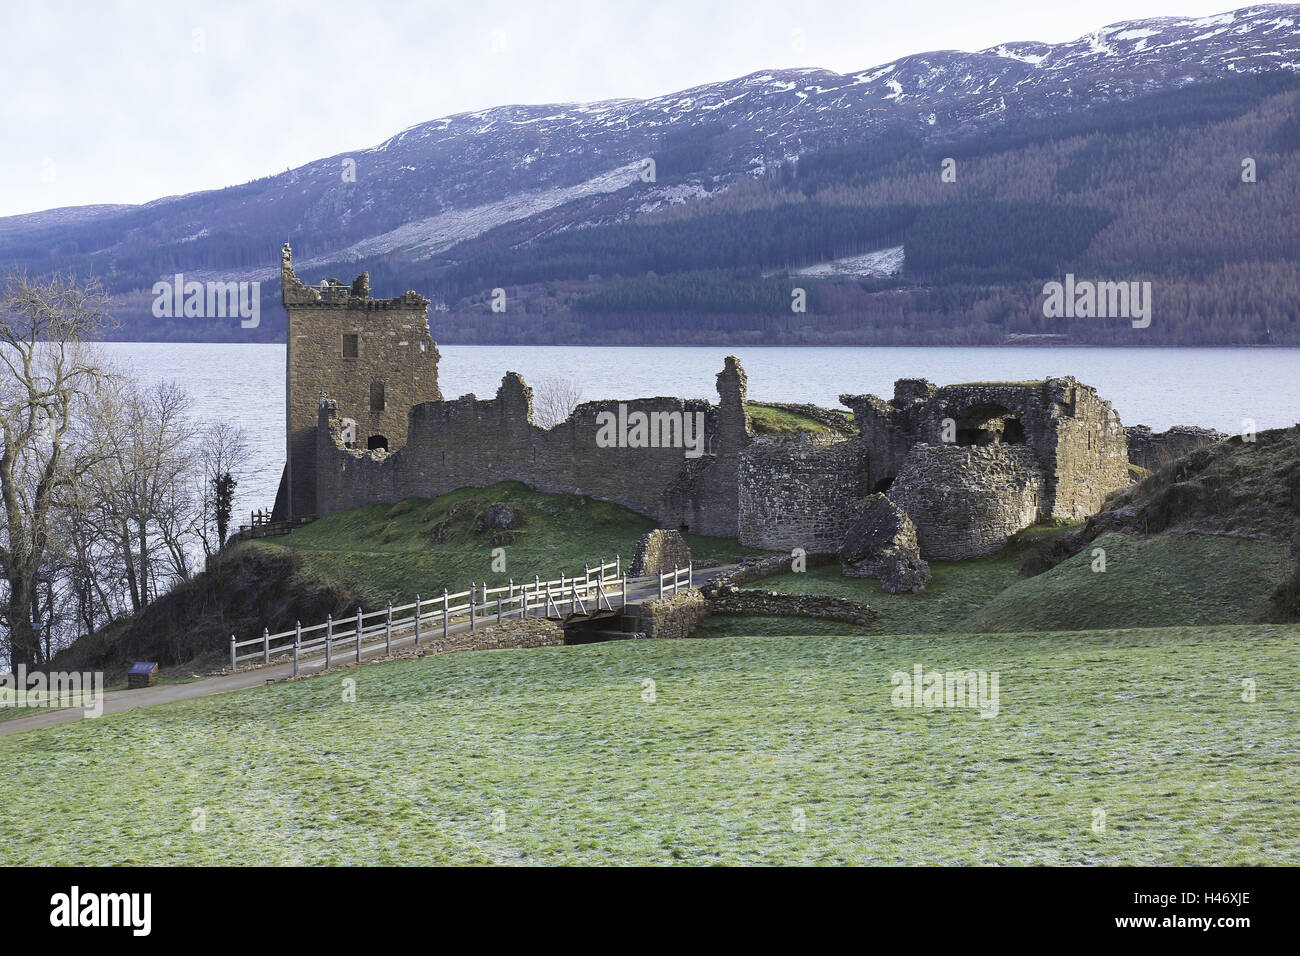 Scotland, Drumnadrochit, hole Ness, castle ruin, castle ruin, ruin, lookout, winter, season, scenery, wildly, earthy, rough, quietly, outside, place of interest, travel, vacation, historically, Nessi, considerably, attraction, tourism, building, Stock Photo